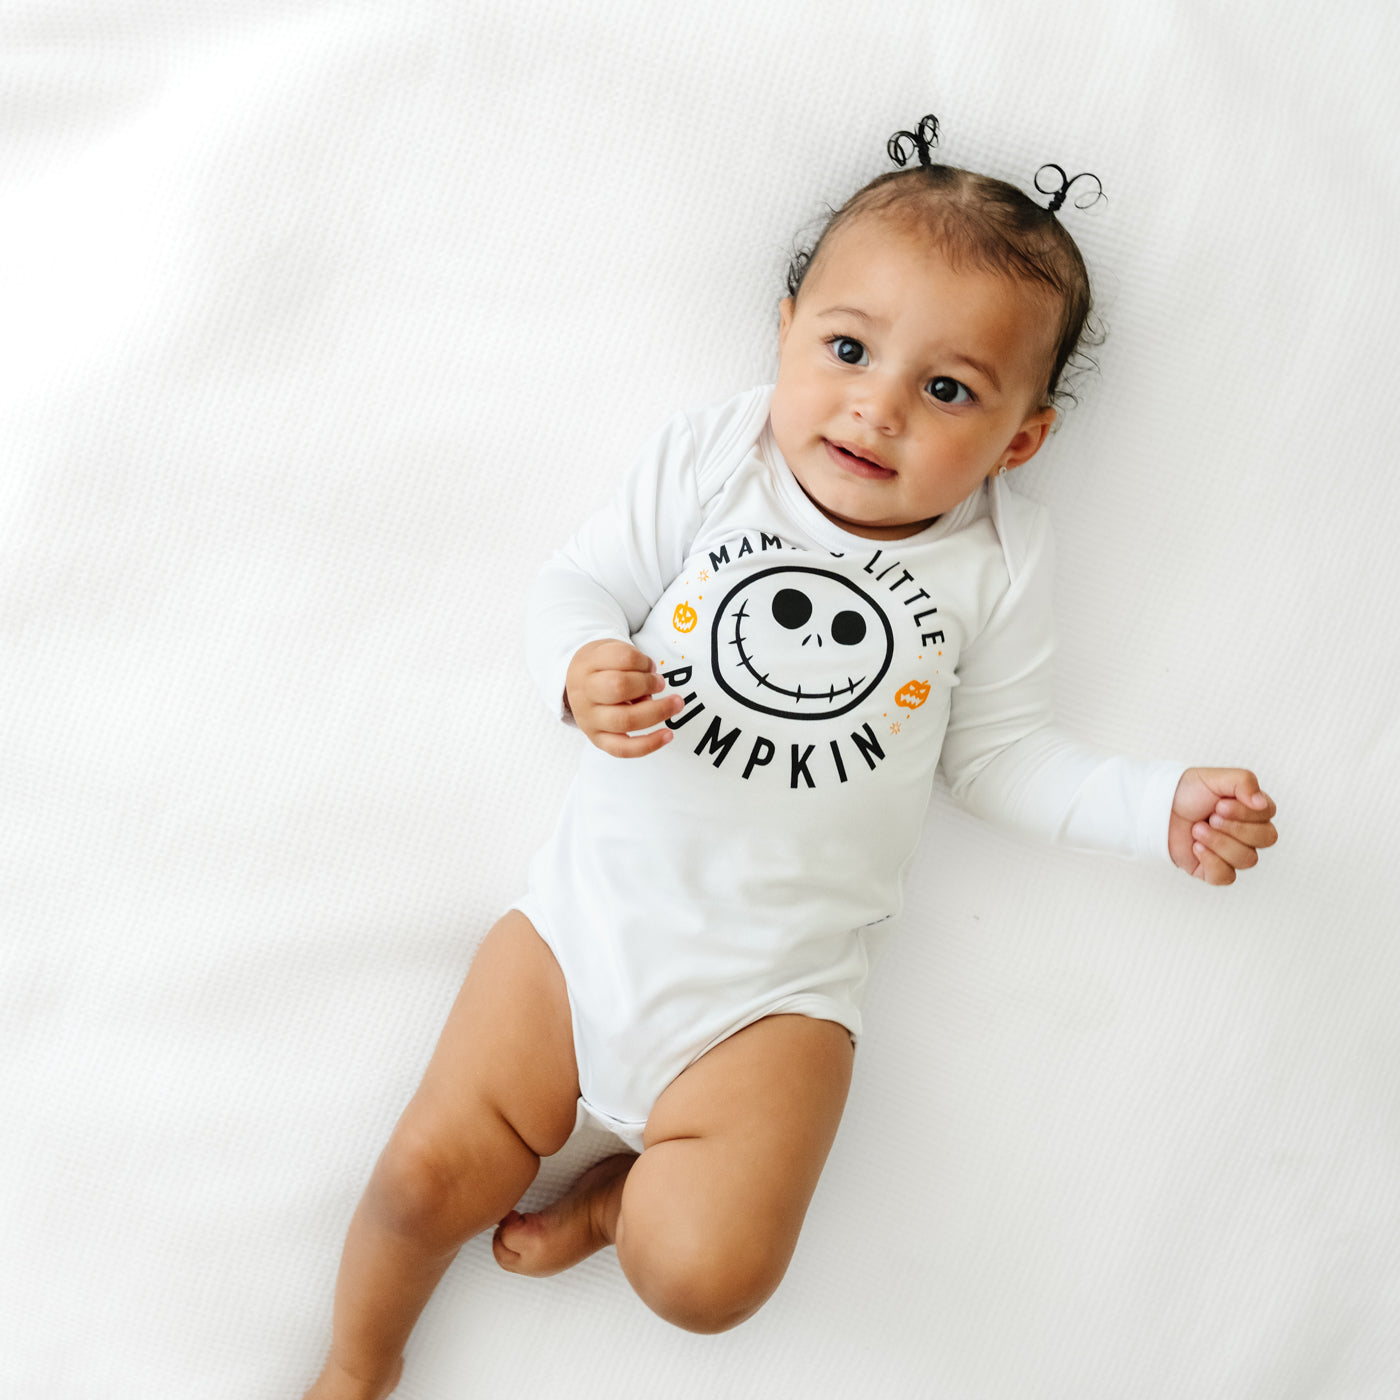 Alternate image of a child laying on a bed wearing a Mama's Little Pumpkin graphic bodysuit